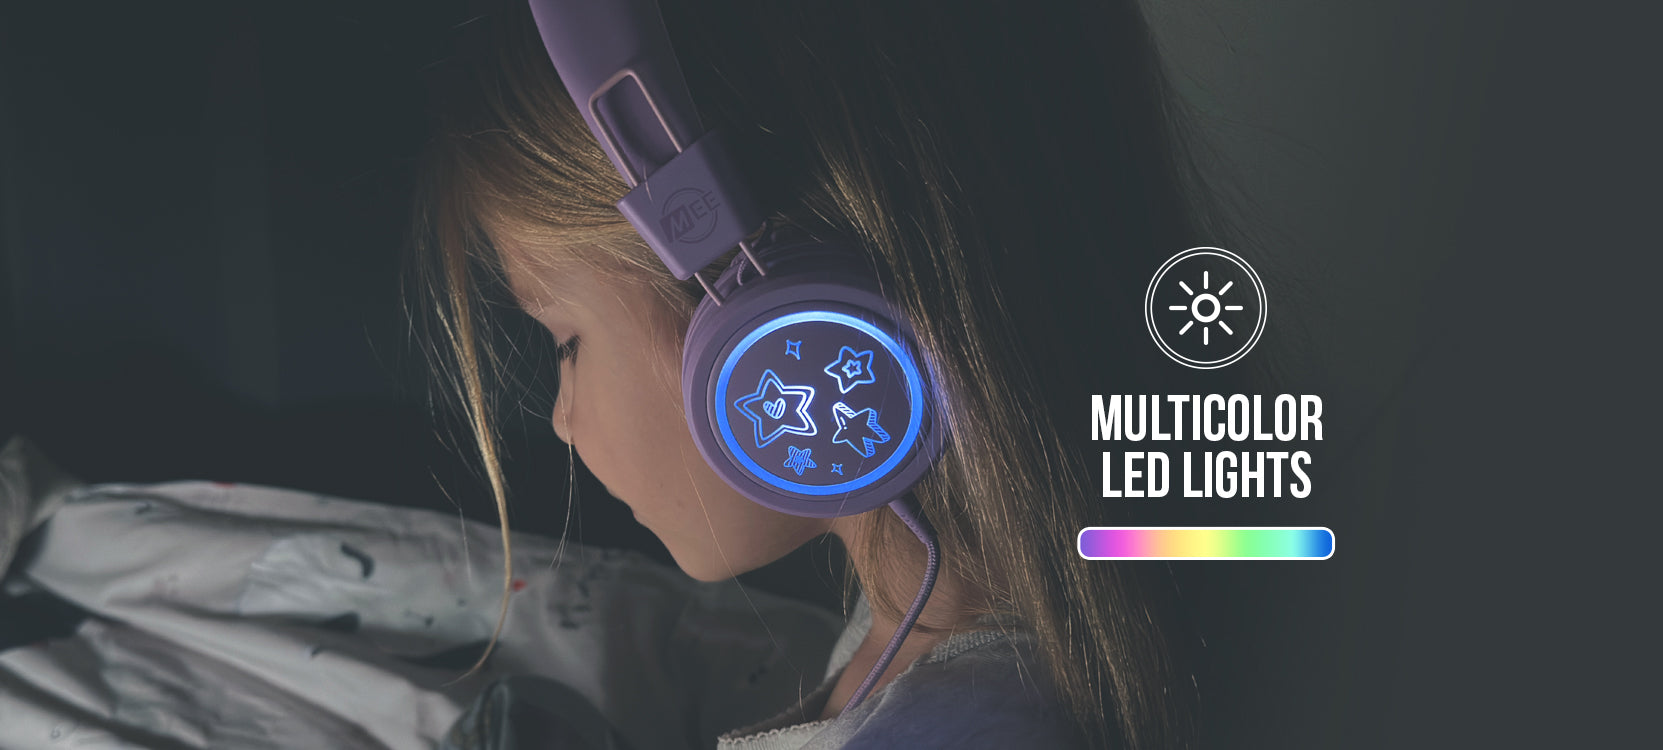 A young girl wearing headphones with glowing multicolor led lights in a dark room, focused on a screen just outside the frame. the text mentions "multicolor led lights.